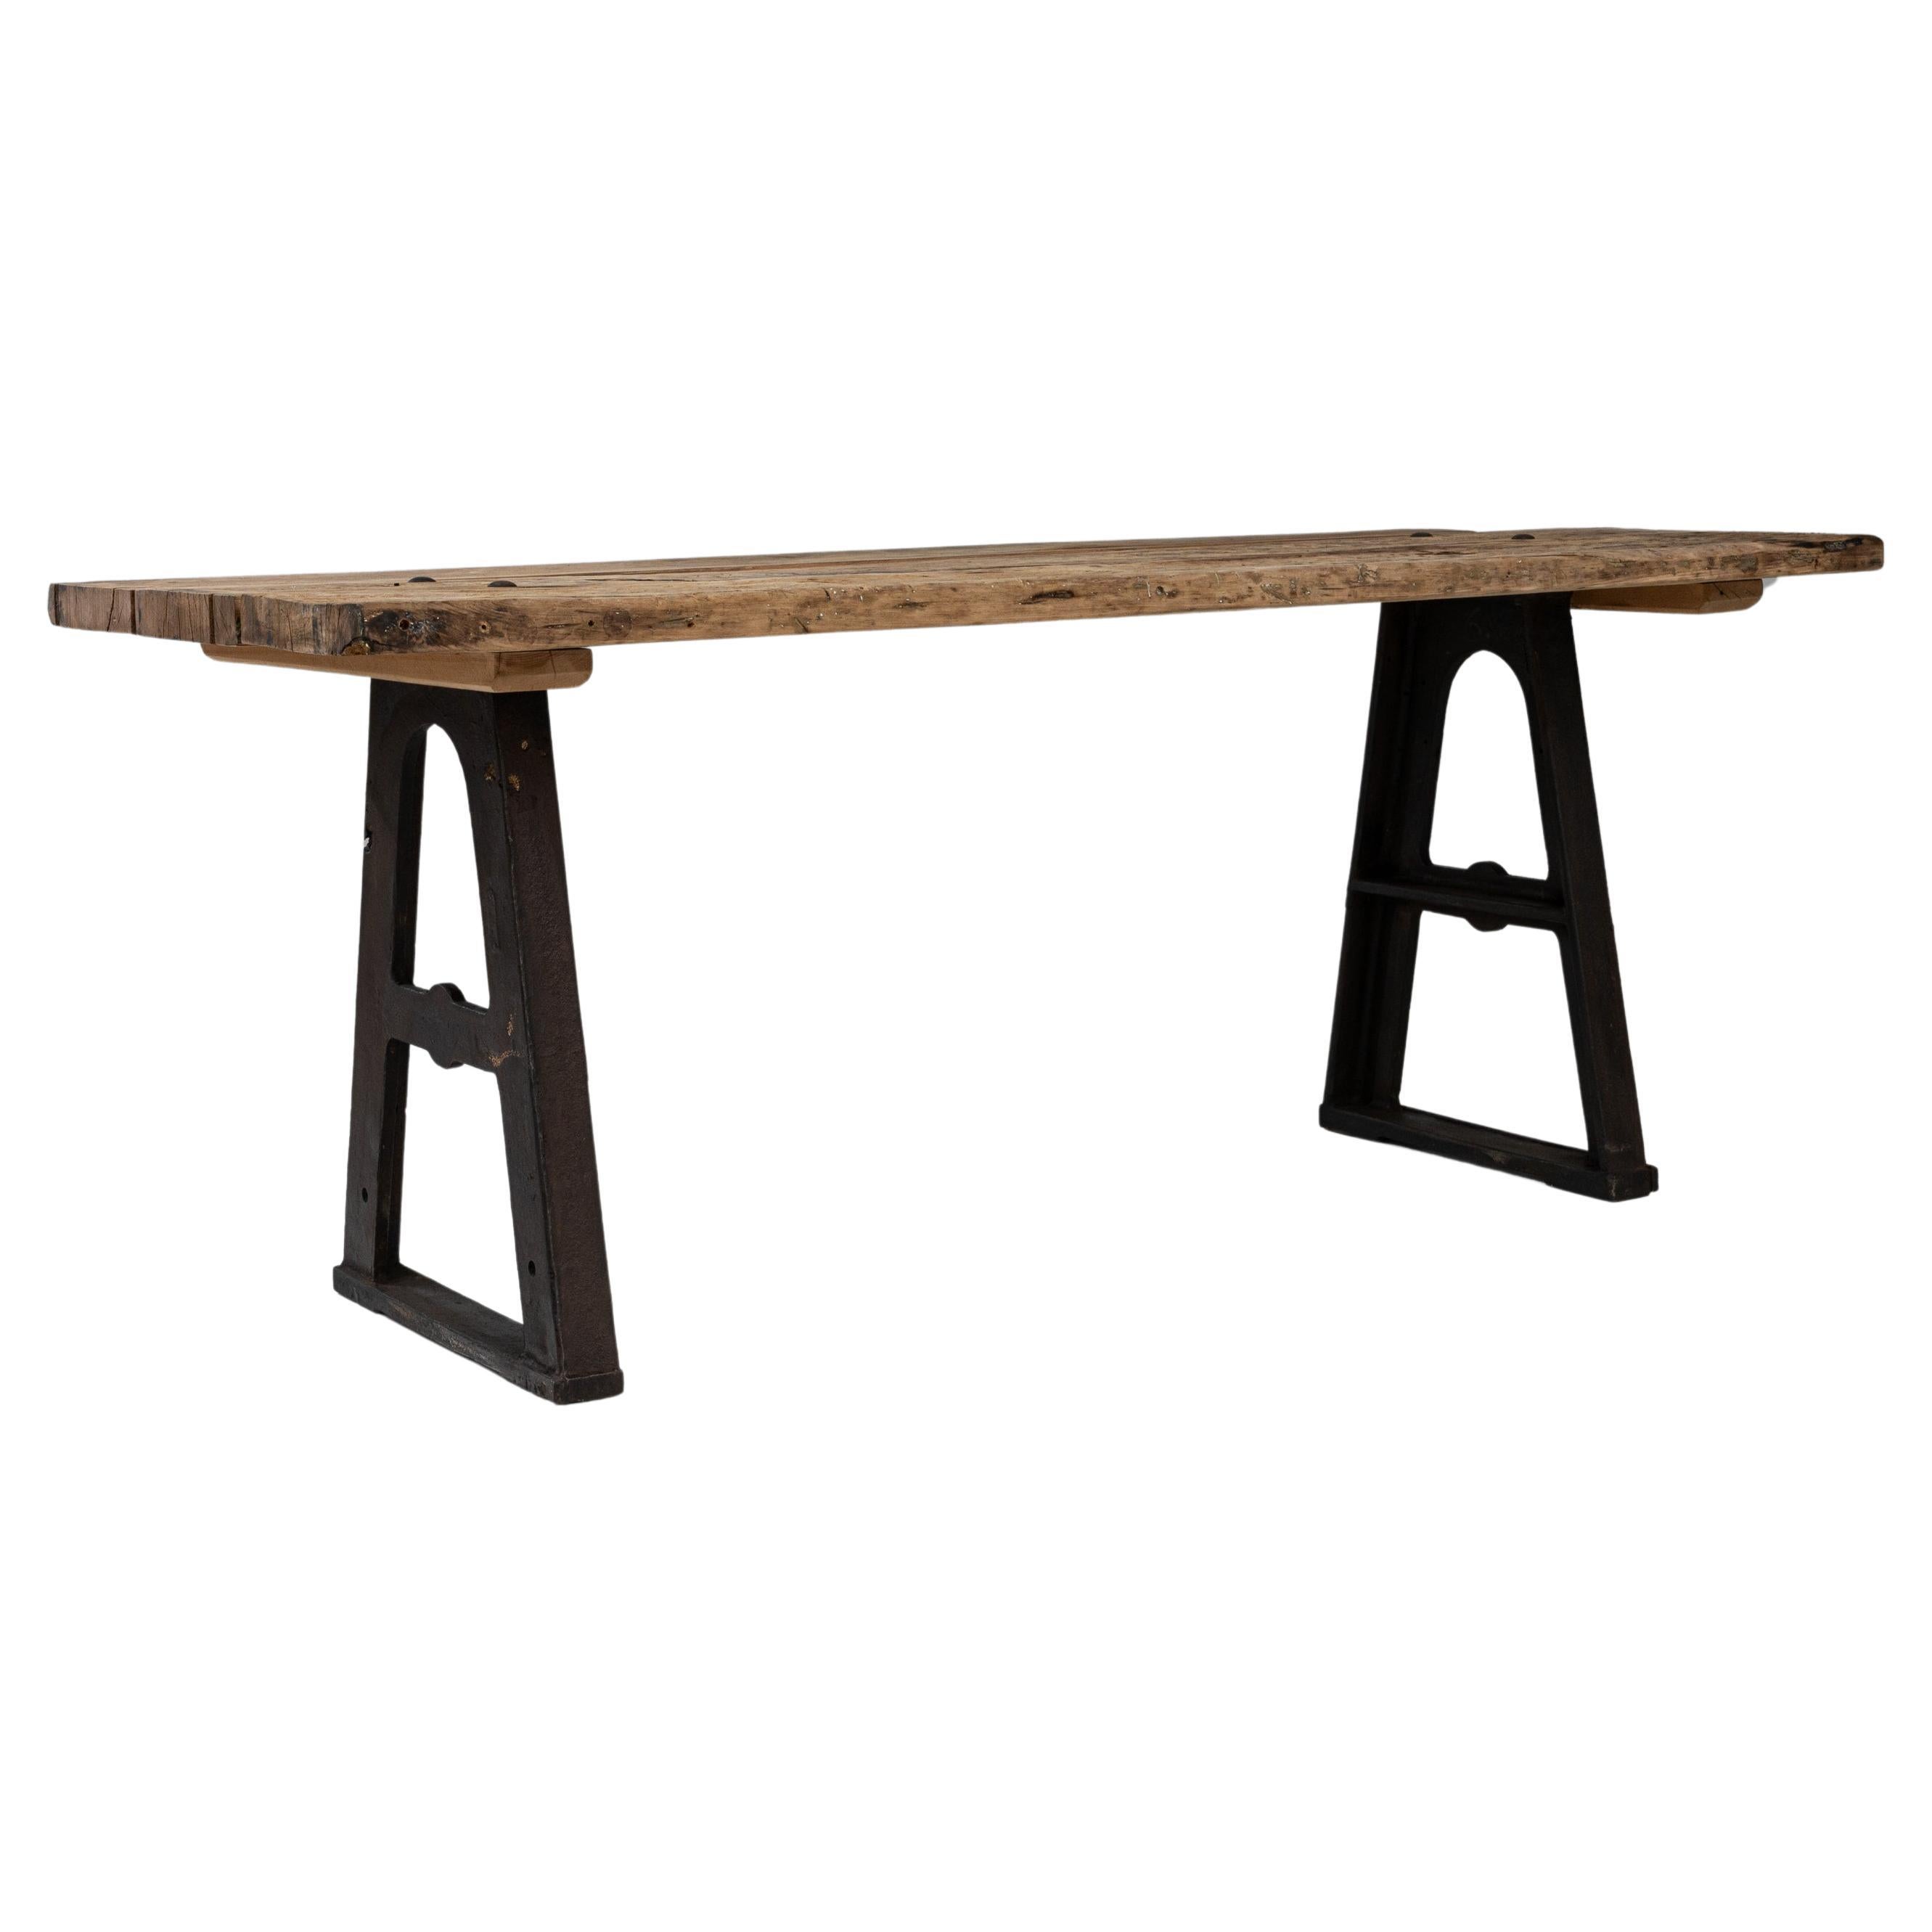 Early 20th Century French Industrial Table For Sale